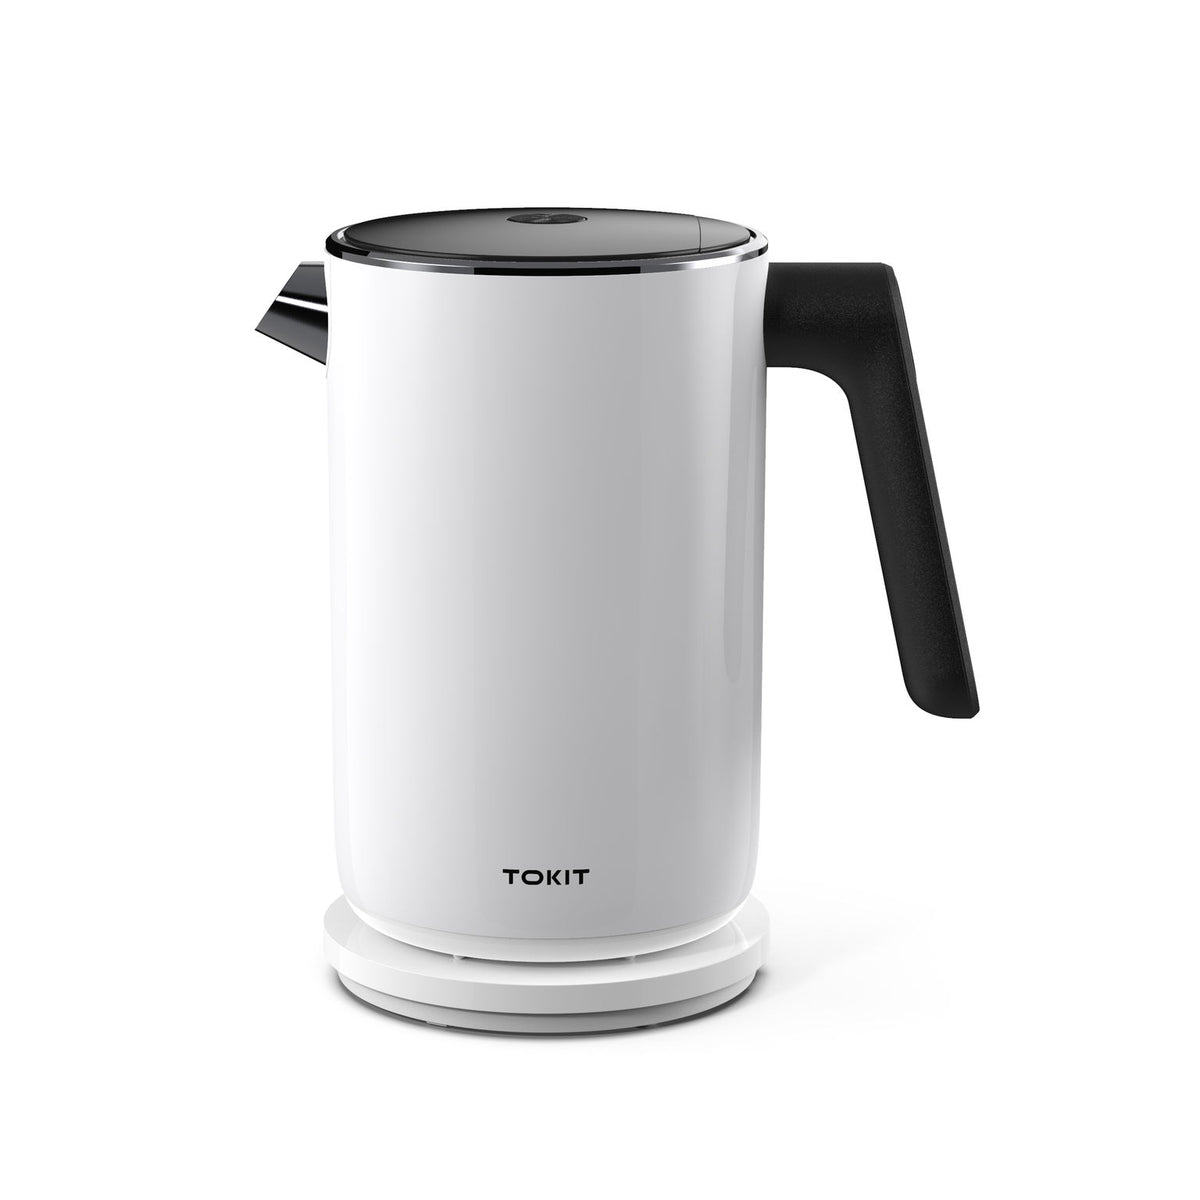 Tokit Intelligent Thermostatic Electric Kettle